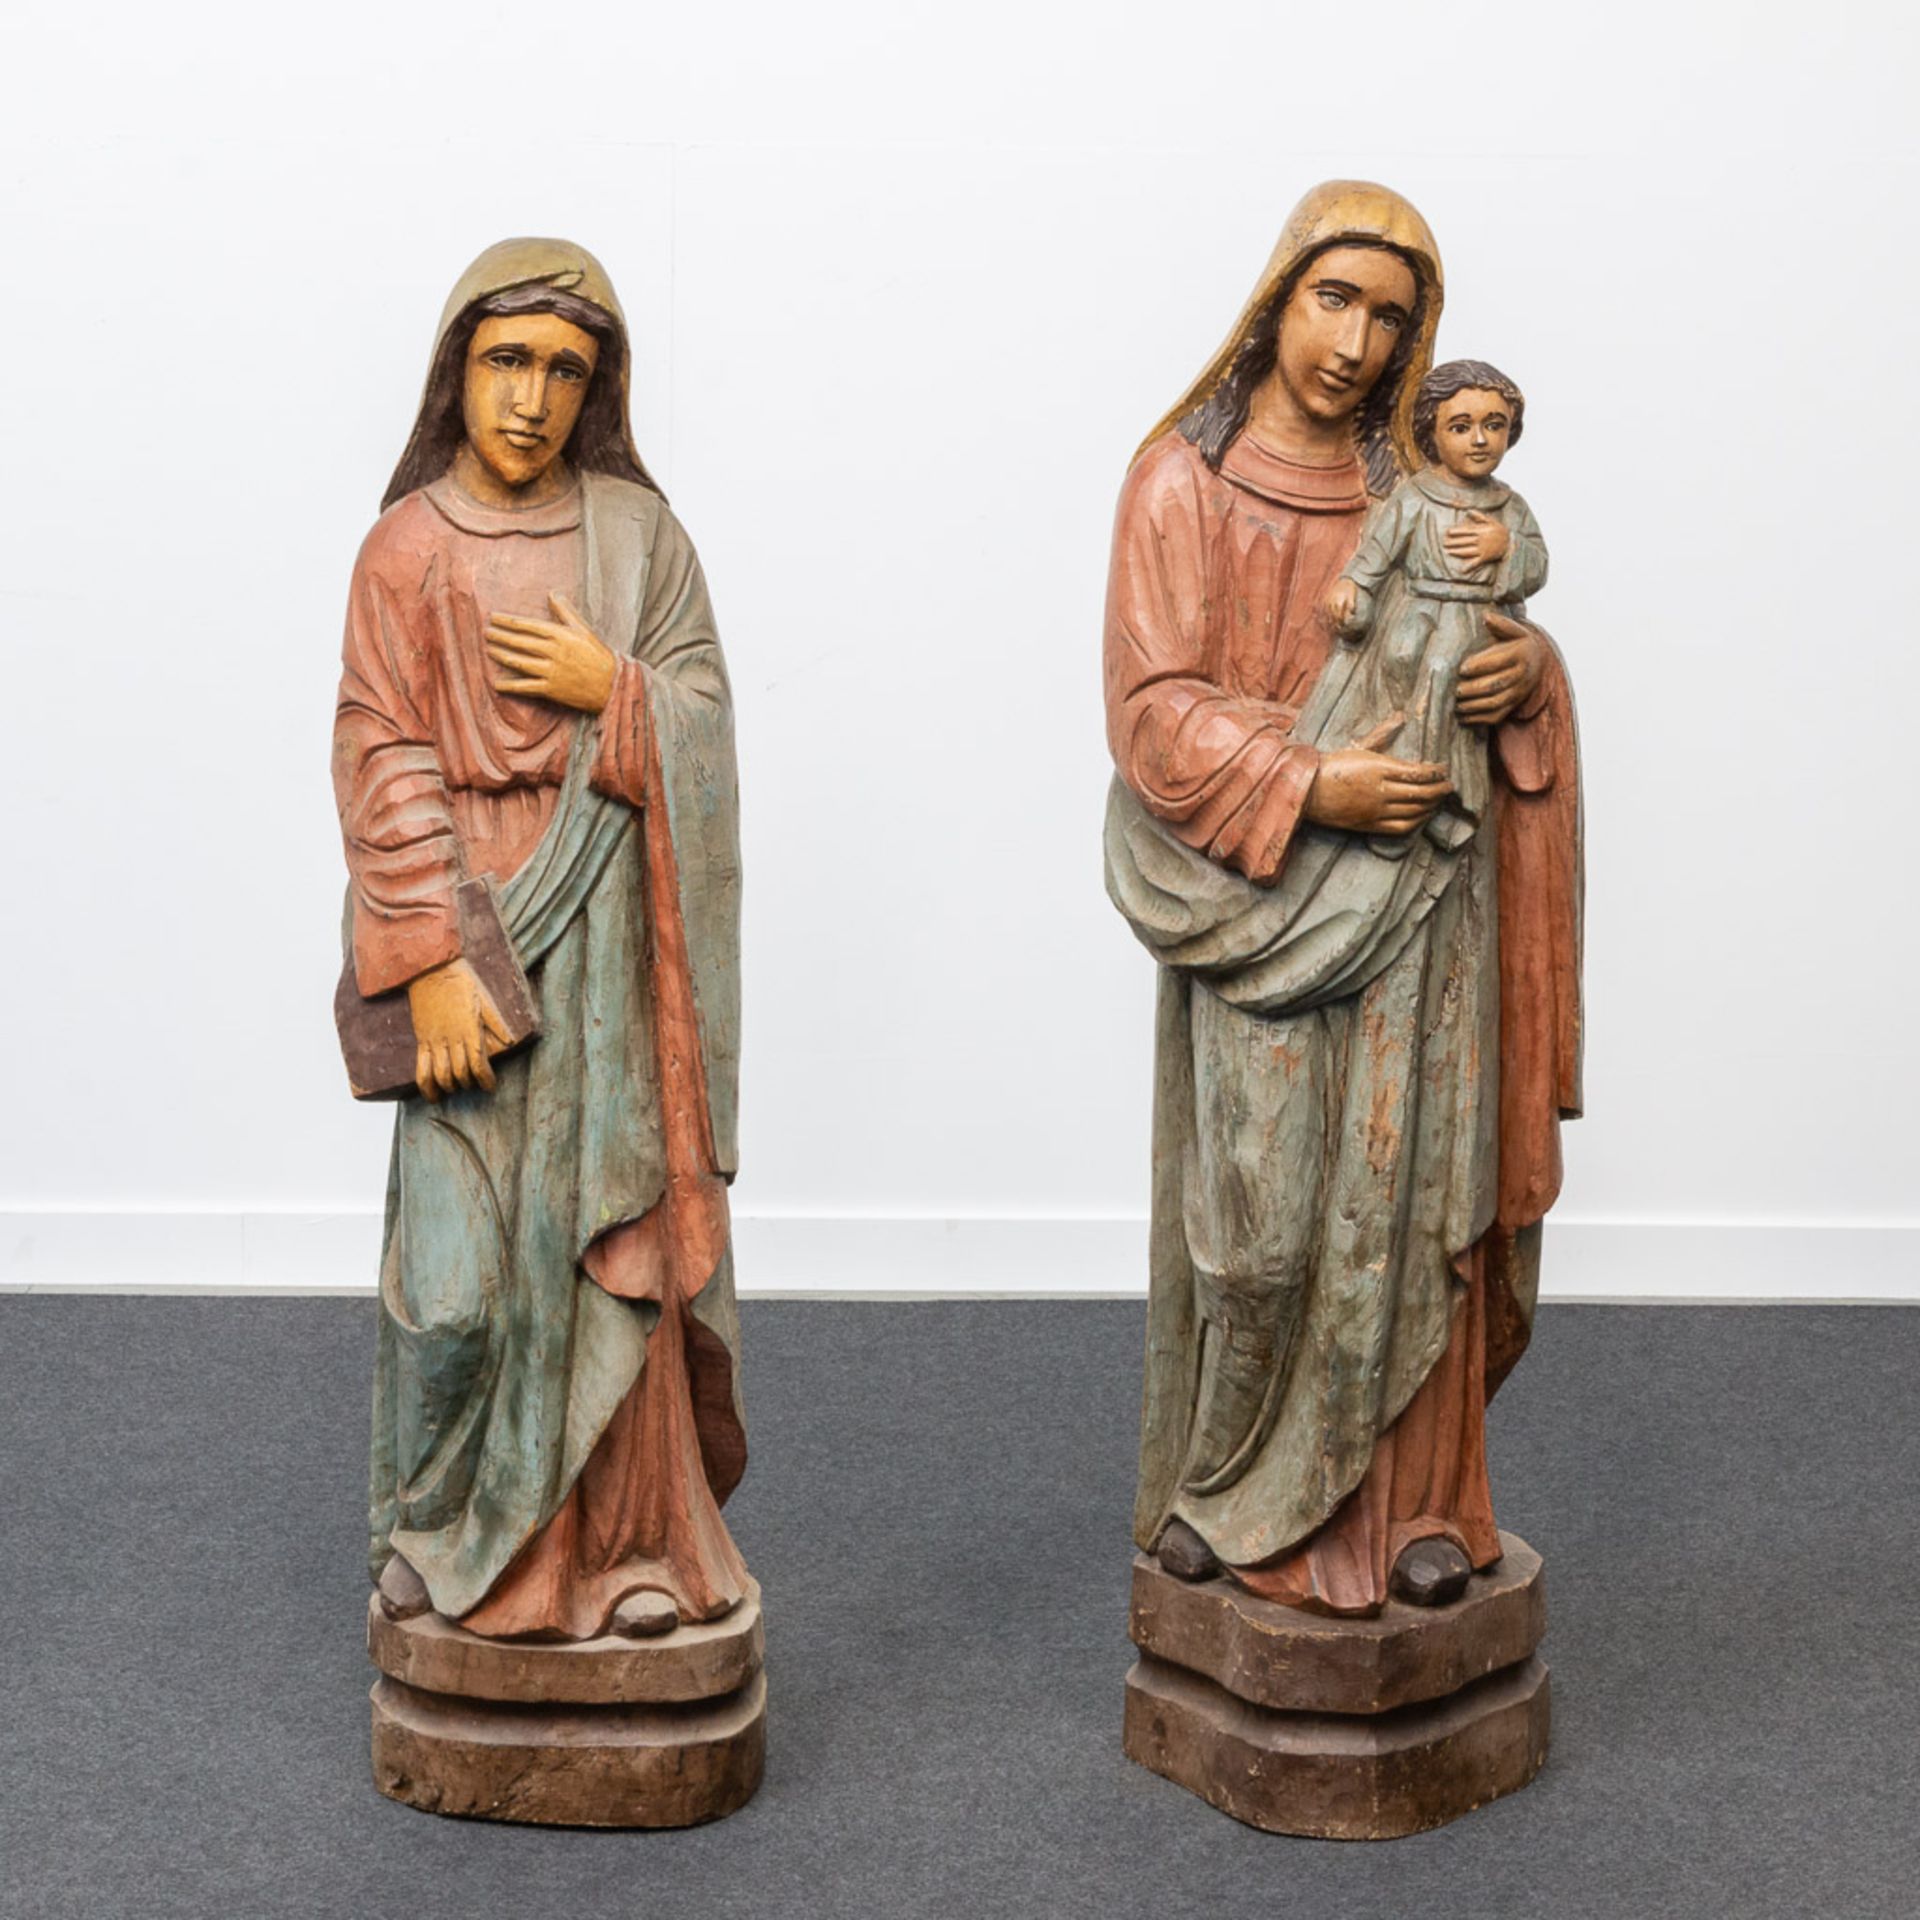 A collection of polychrome wood statues, images of Madonna